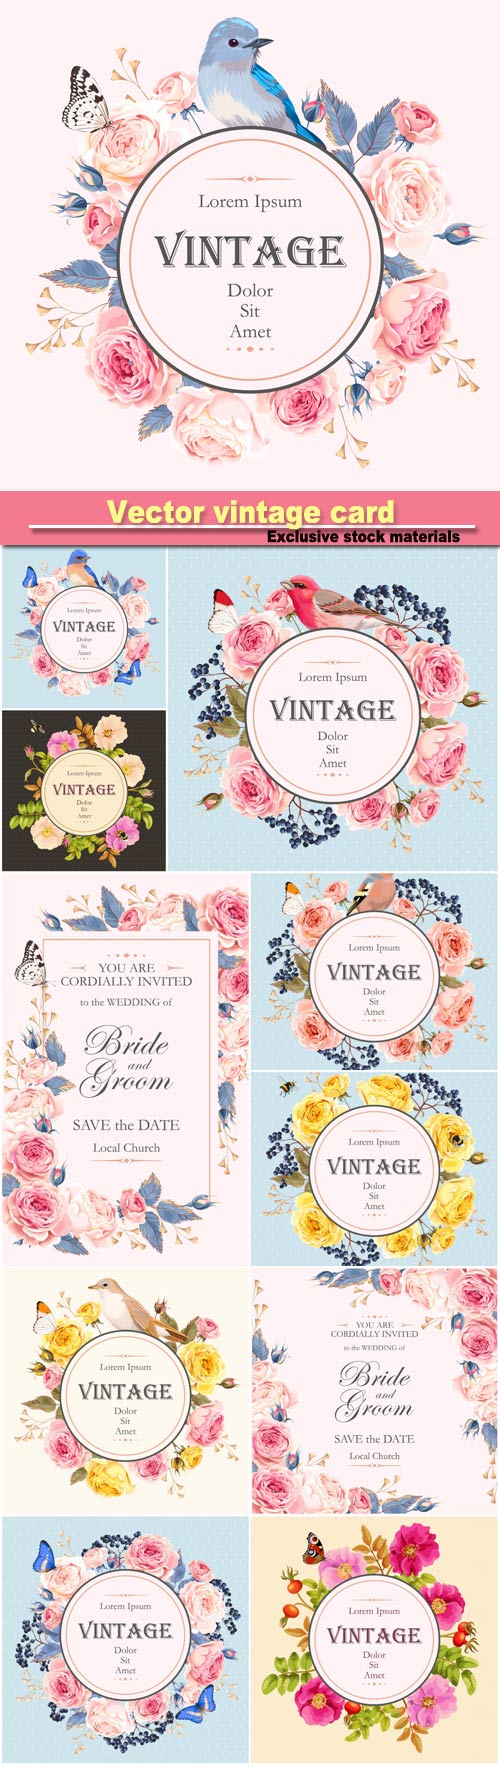 Vector vintage card with english roses and bird